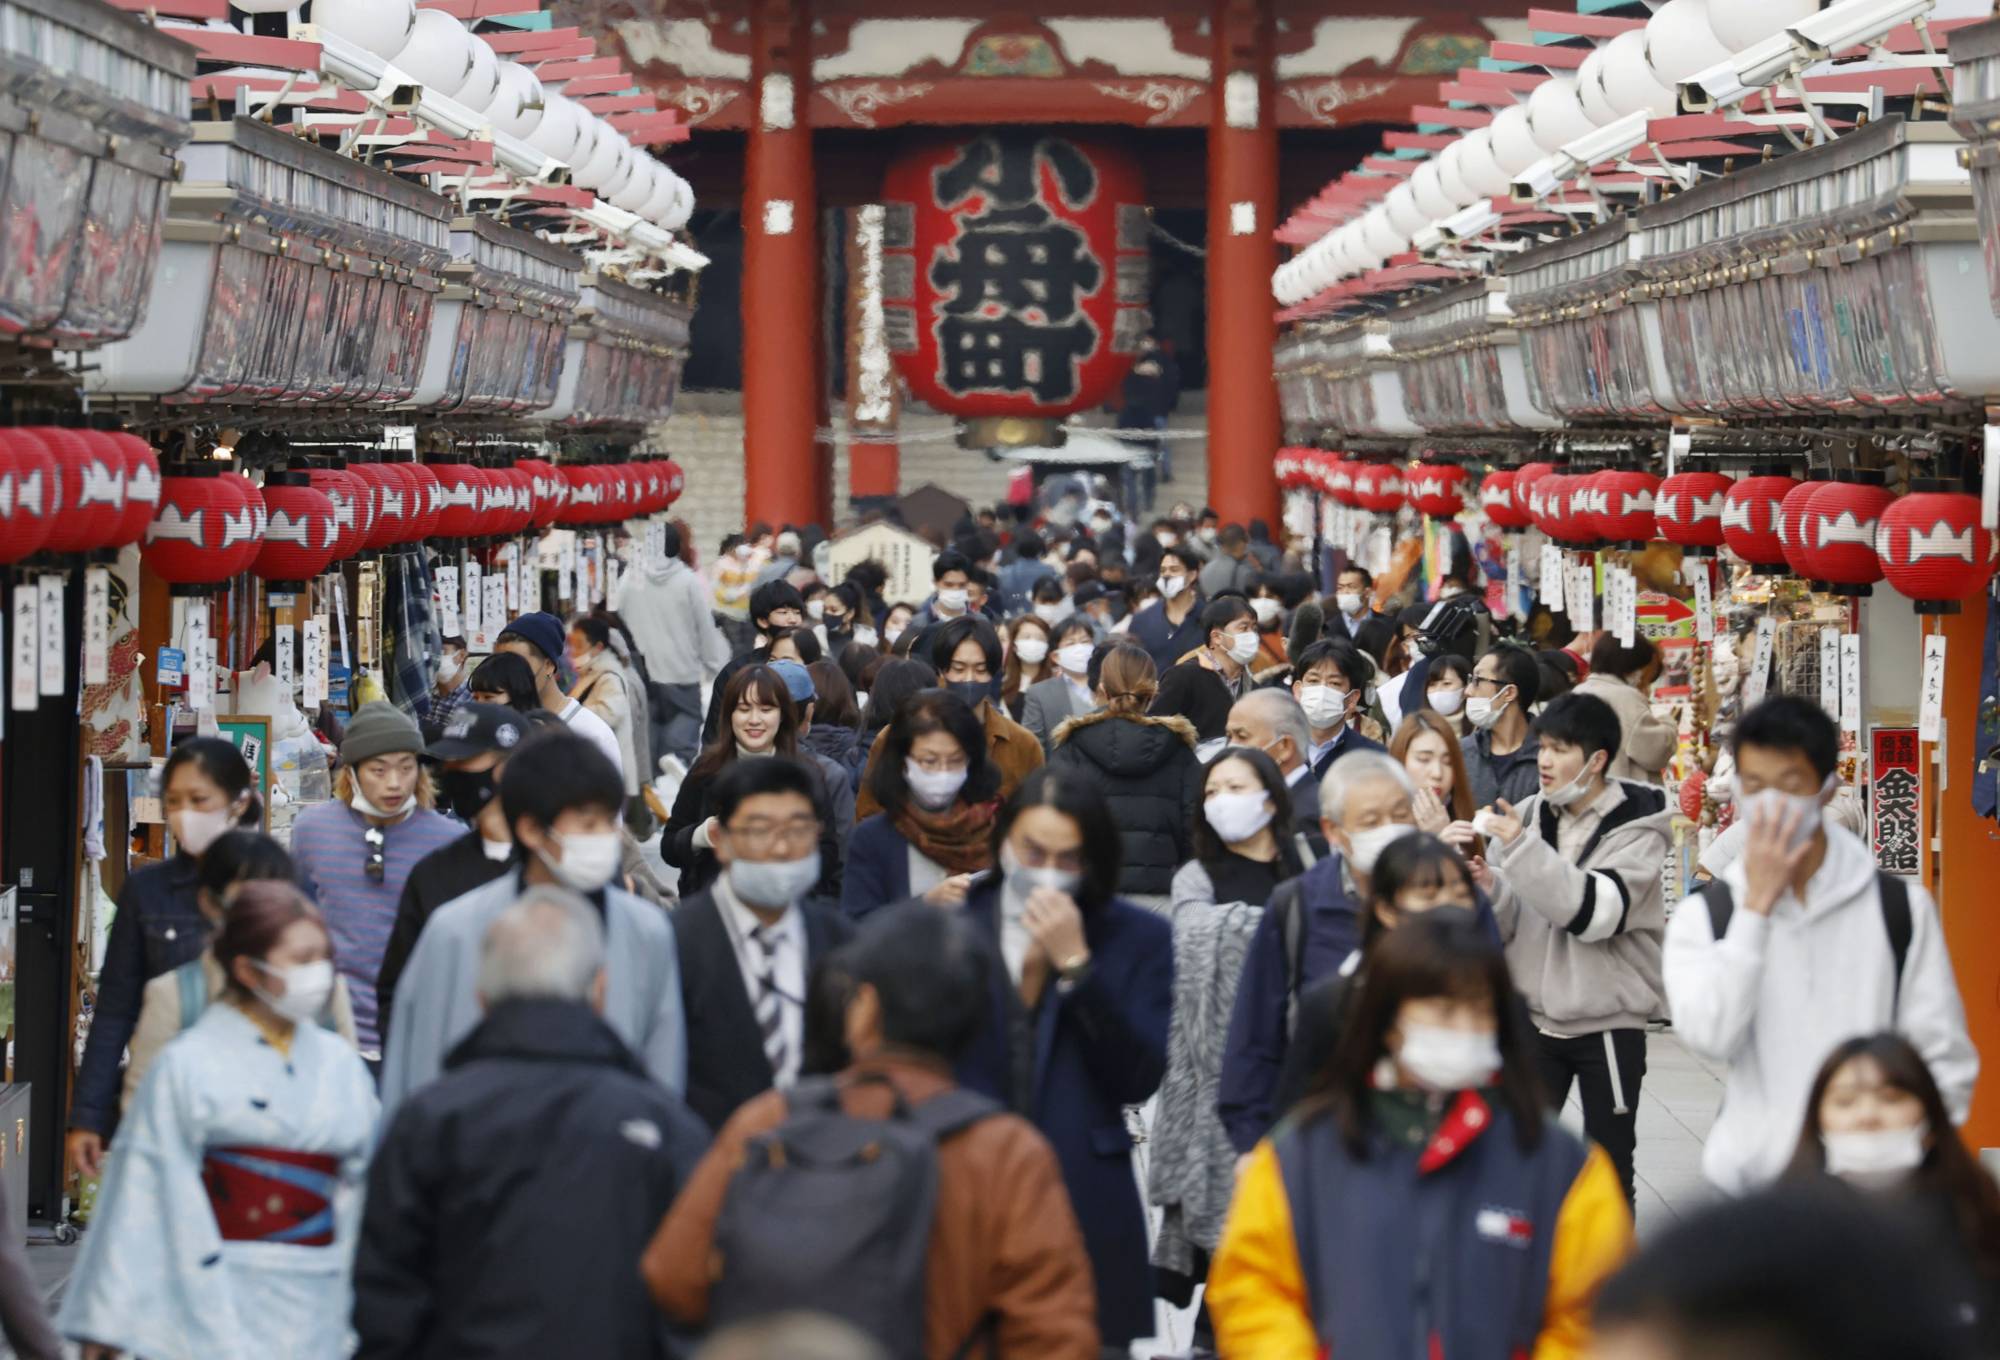 Japan Reported Record-High Daily COVID-19 Cases For Third Straight Day